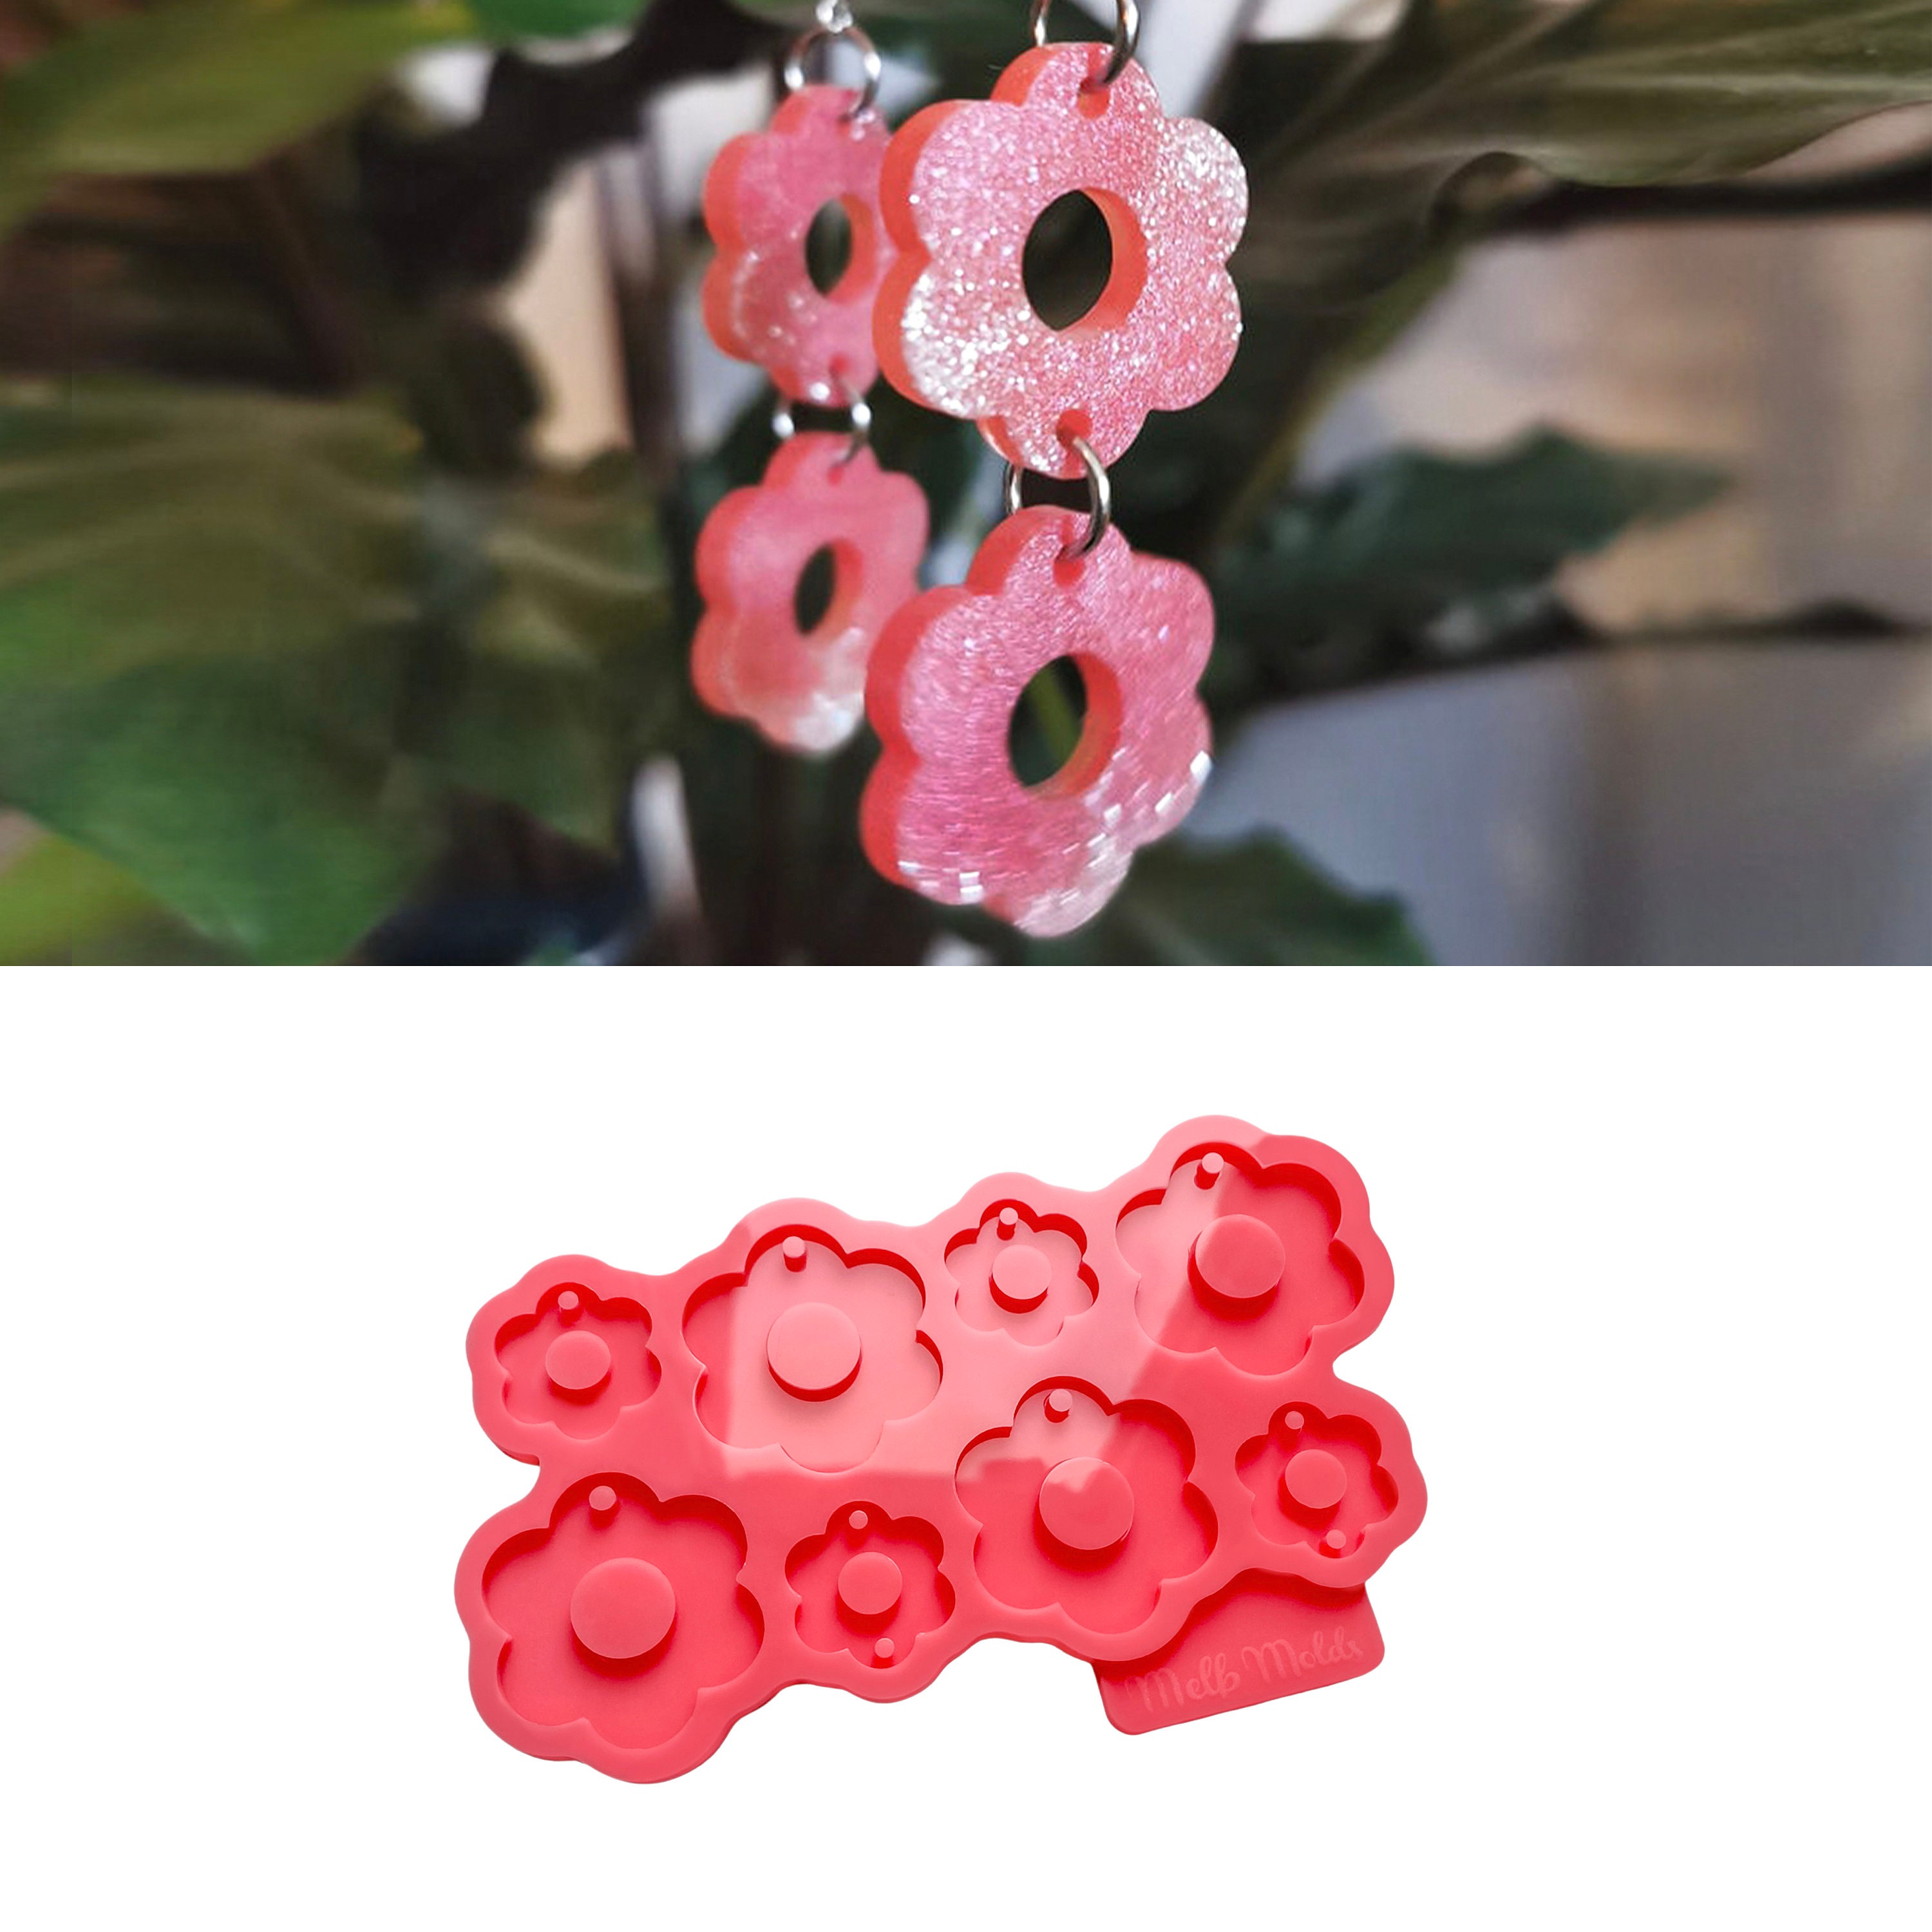  3D Daisy Flower Silicone Mold, 4PCS Bloom Flower Silicone Molds  for Wax Melts, Candles, Soap Making, Fondant, Candy Chocolate, Cake Cupcake  Decorating, Epoxy Resin Casting, DIY Craft